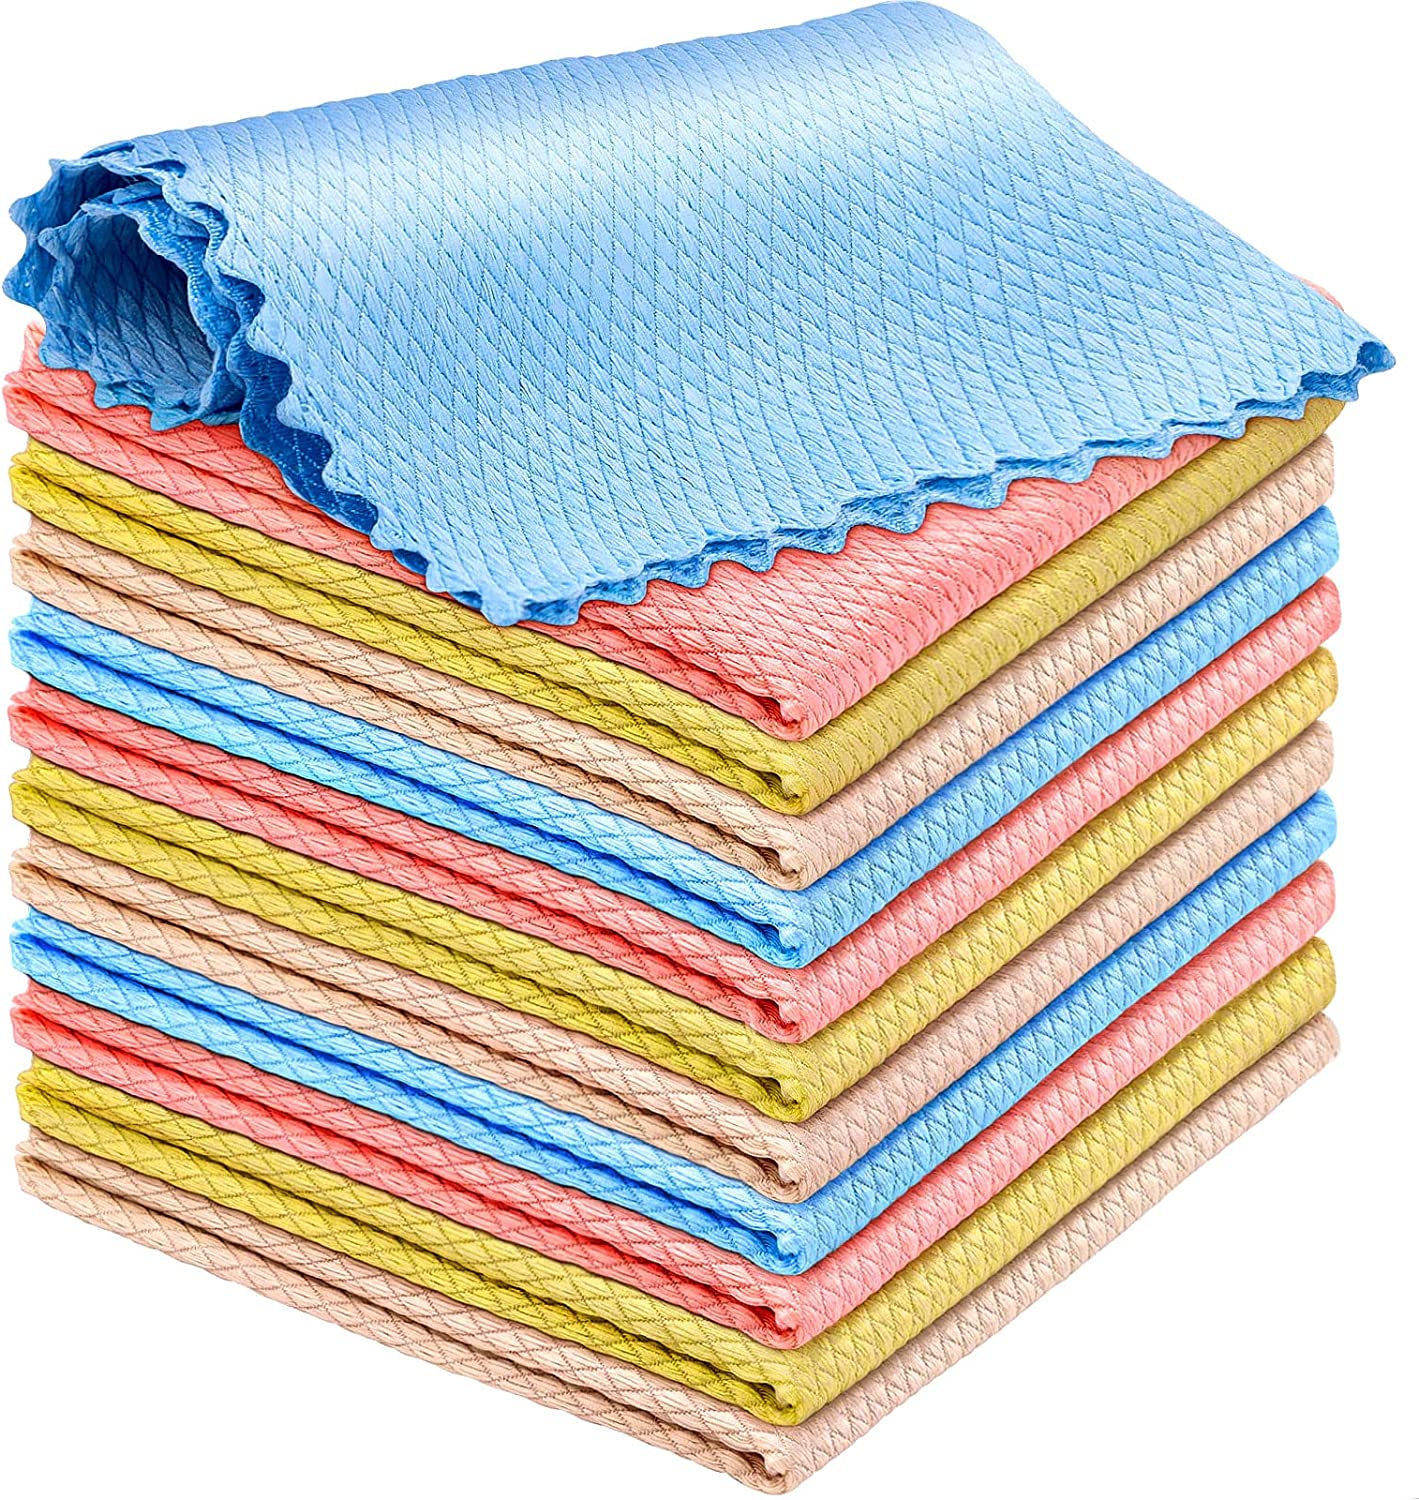 JOYMOOP Microfiber Cleaning Cloth, Kitchen Towels for Dish Drying Washing,  Absorbent Streak Free Lint Free Rags for Cleaning, Reusable and Washable